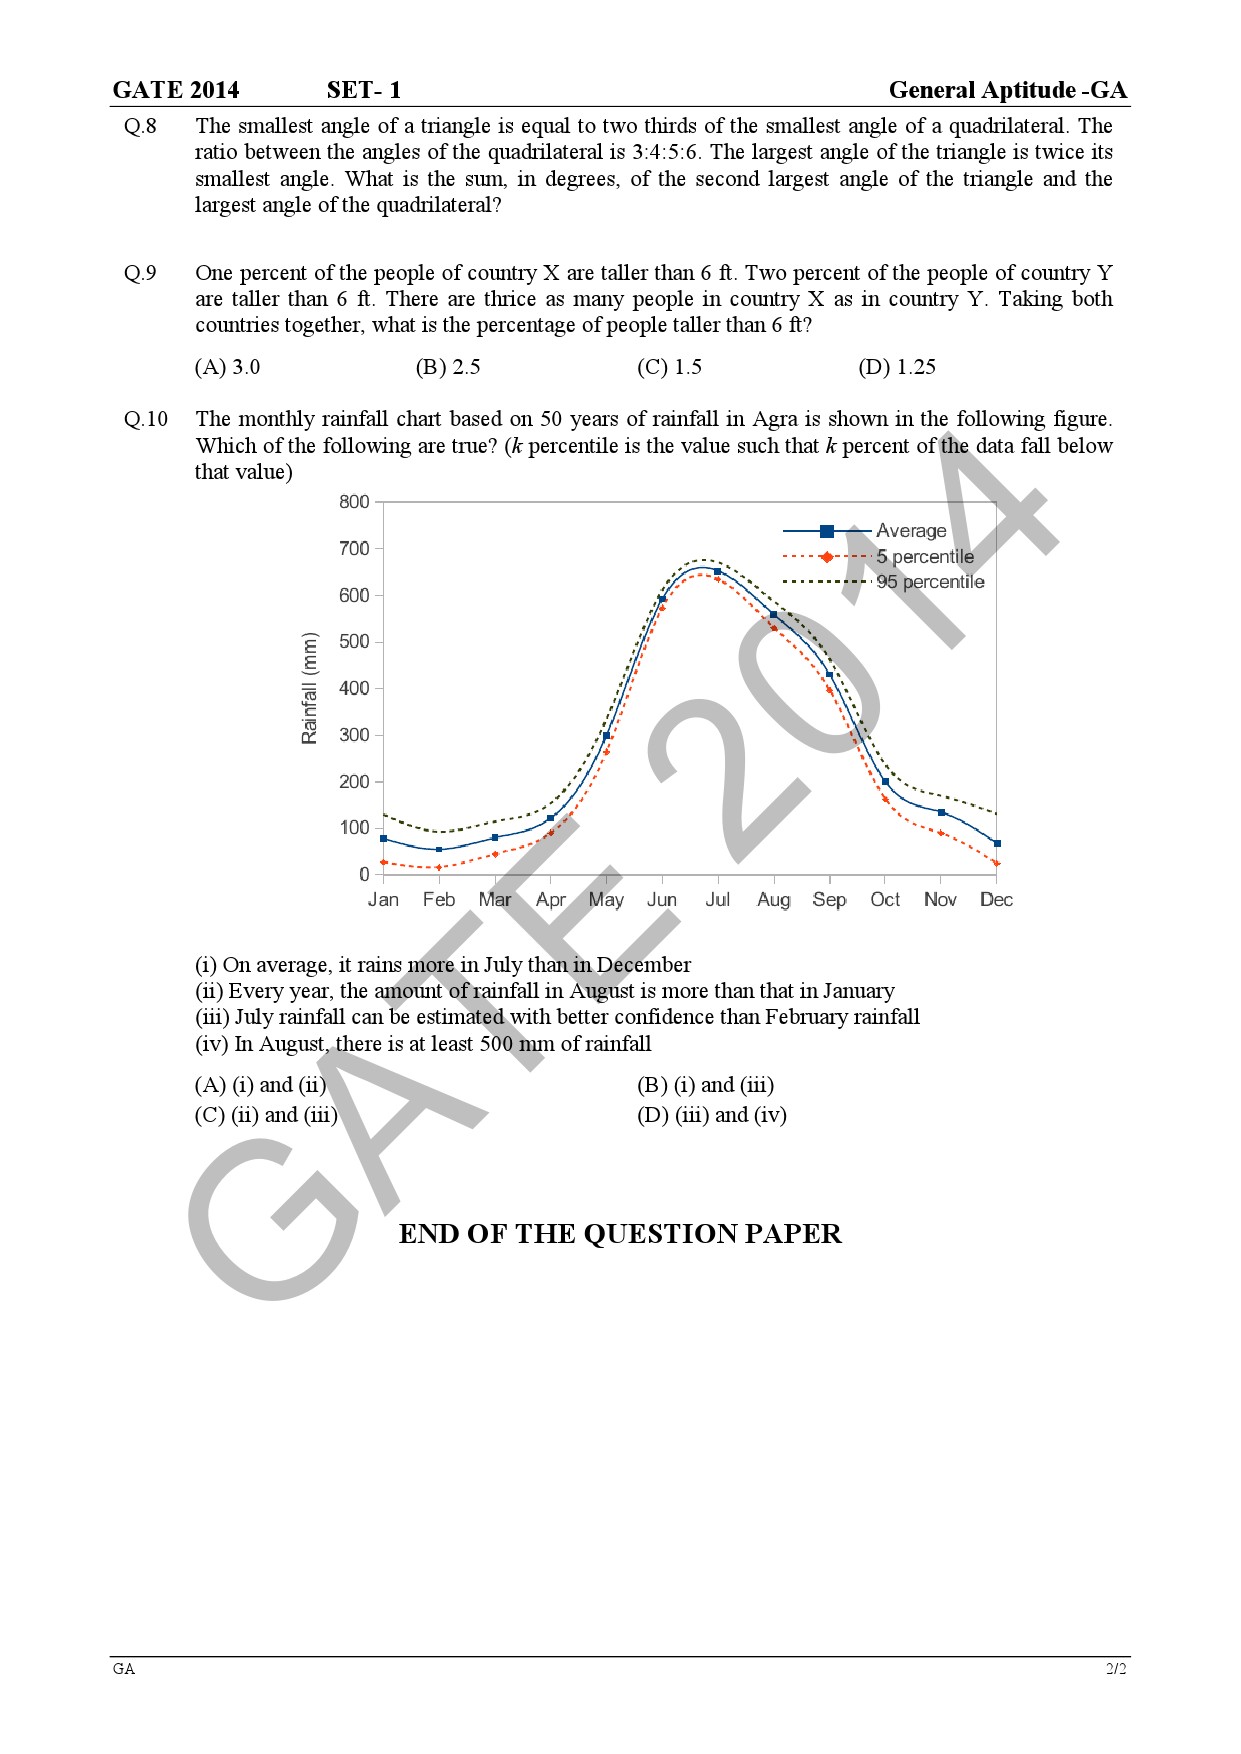 GATE Exam Question Paper 2014 Architecture and Planning 6